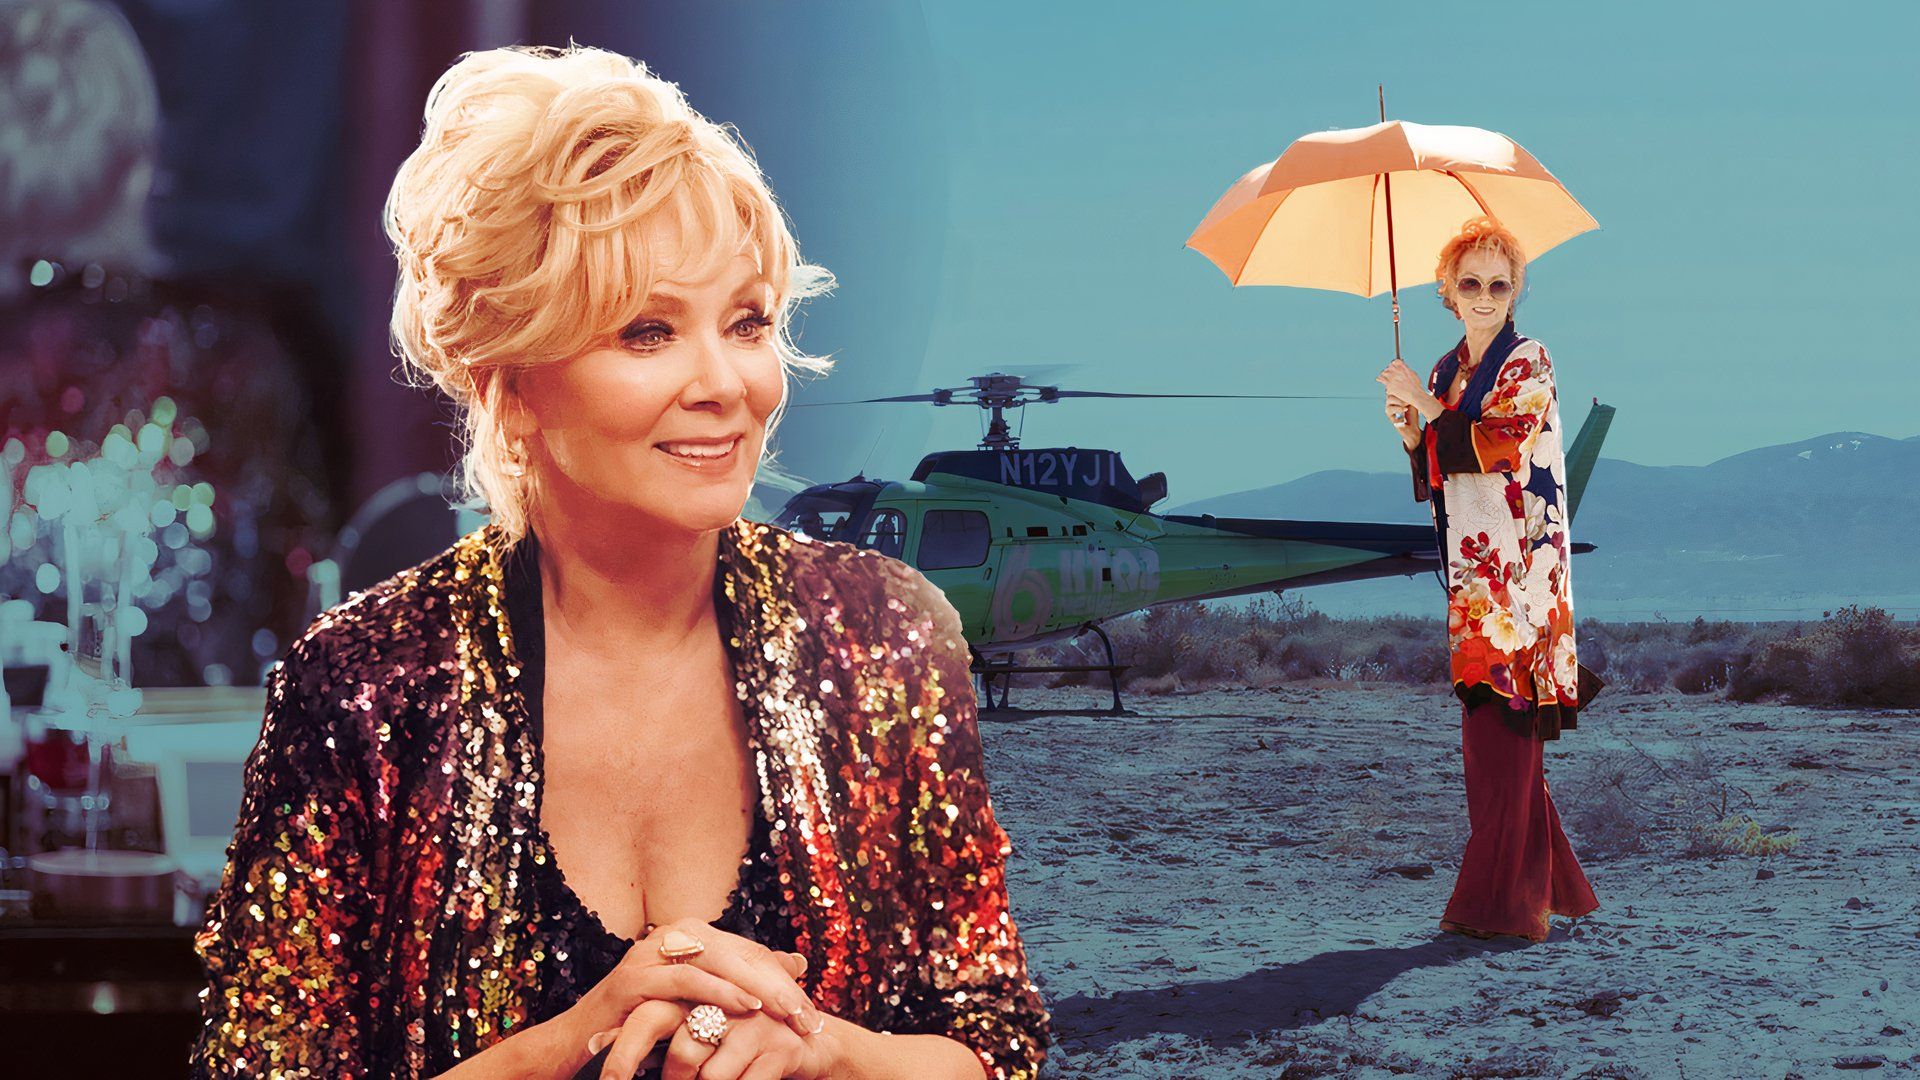 An edited image of Jean Smart as Deborah Vance smiling and holding an umbrella by a helicopter in Hacks